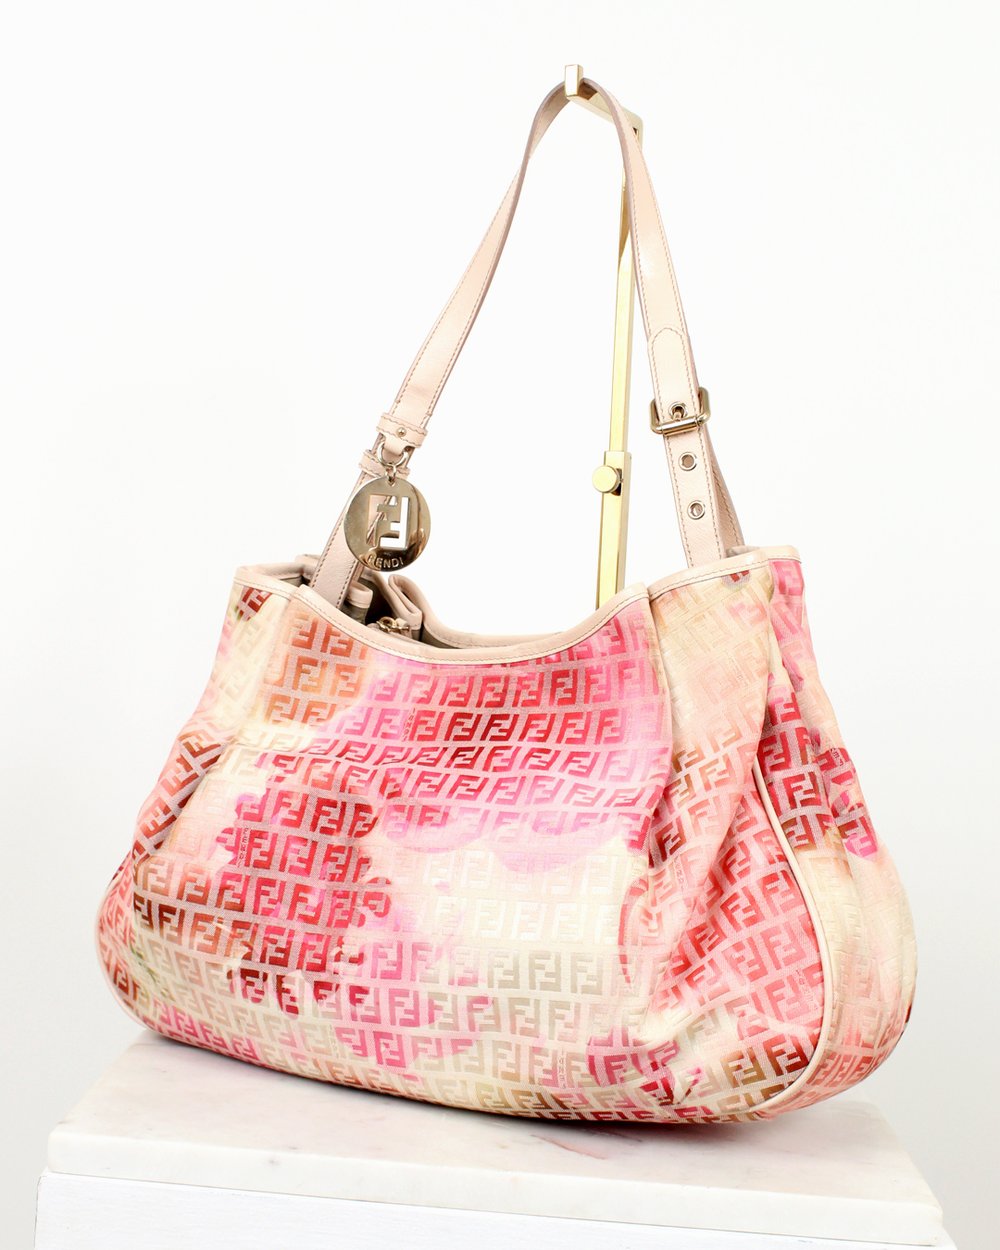 Louis Vuitton Discontinued Monogram Flower Hobo Artsy 121lv34 For